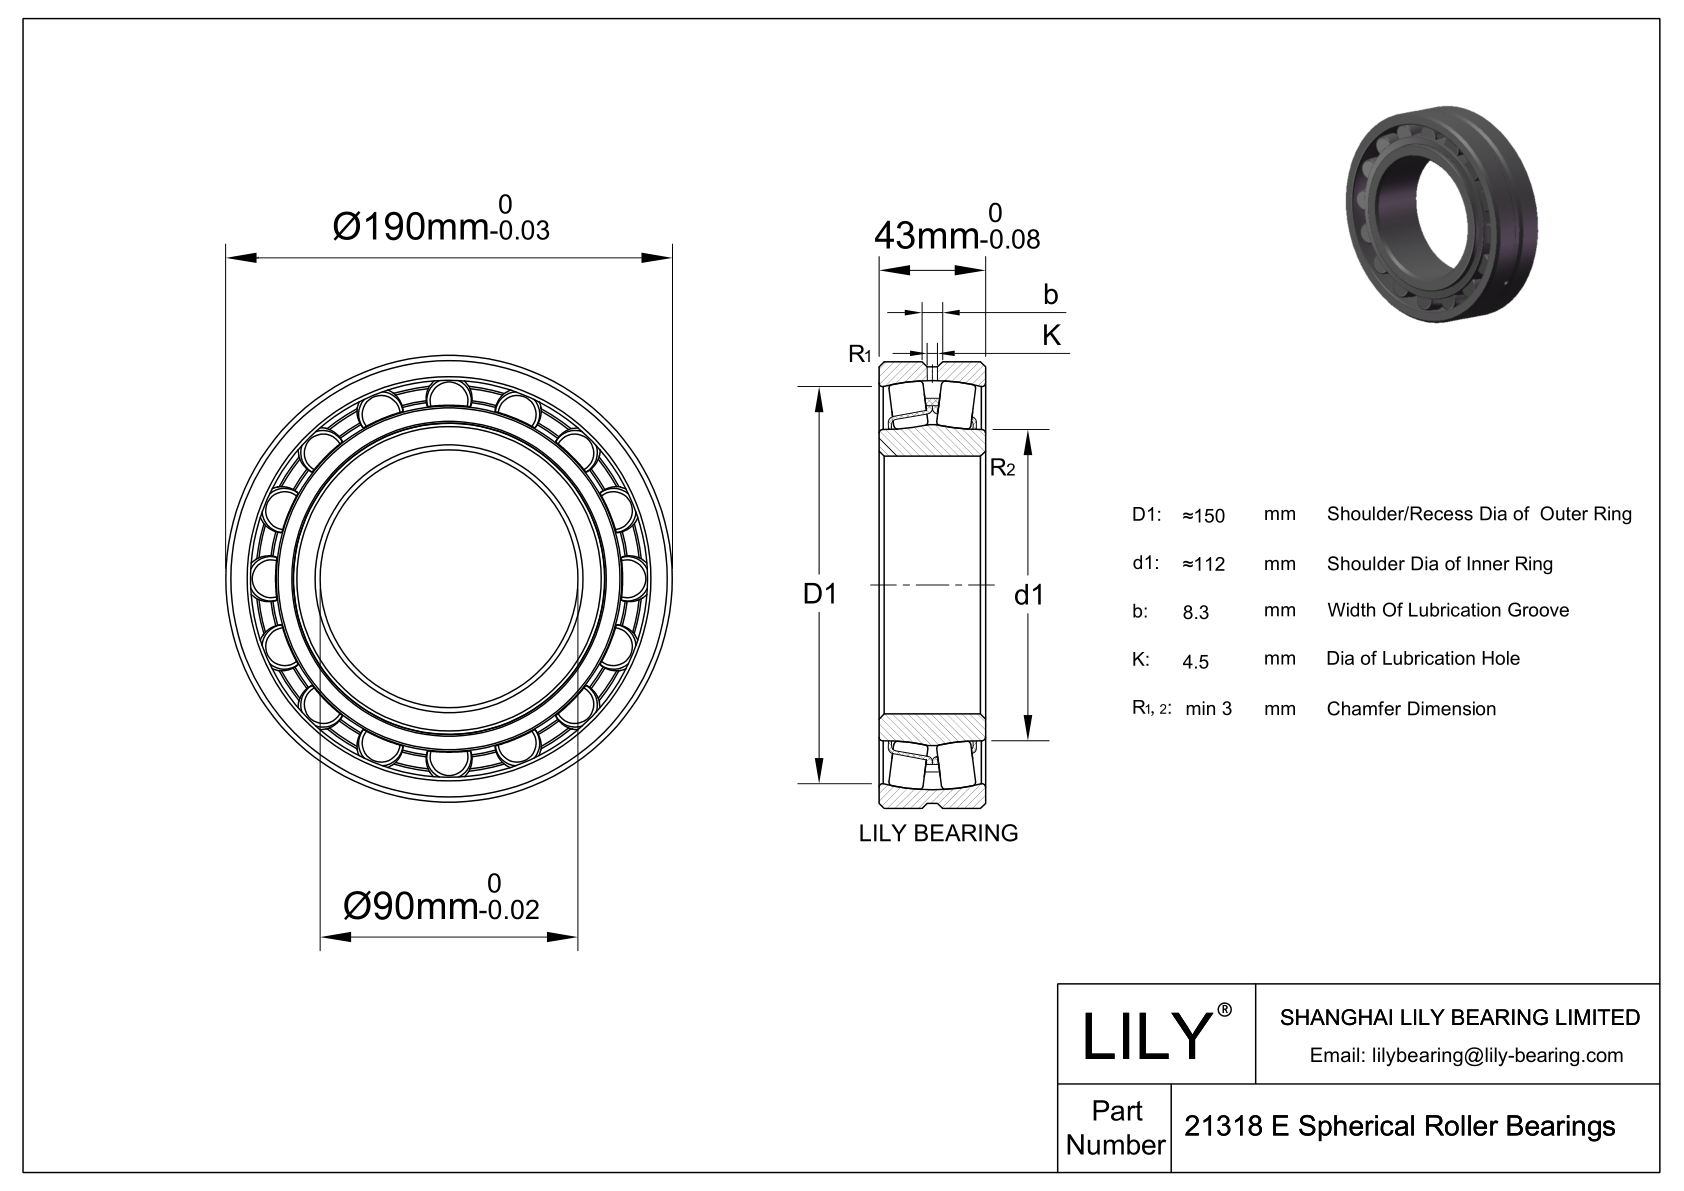 21318 E Double Row Spherical Roller Bearing cad drawing